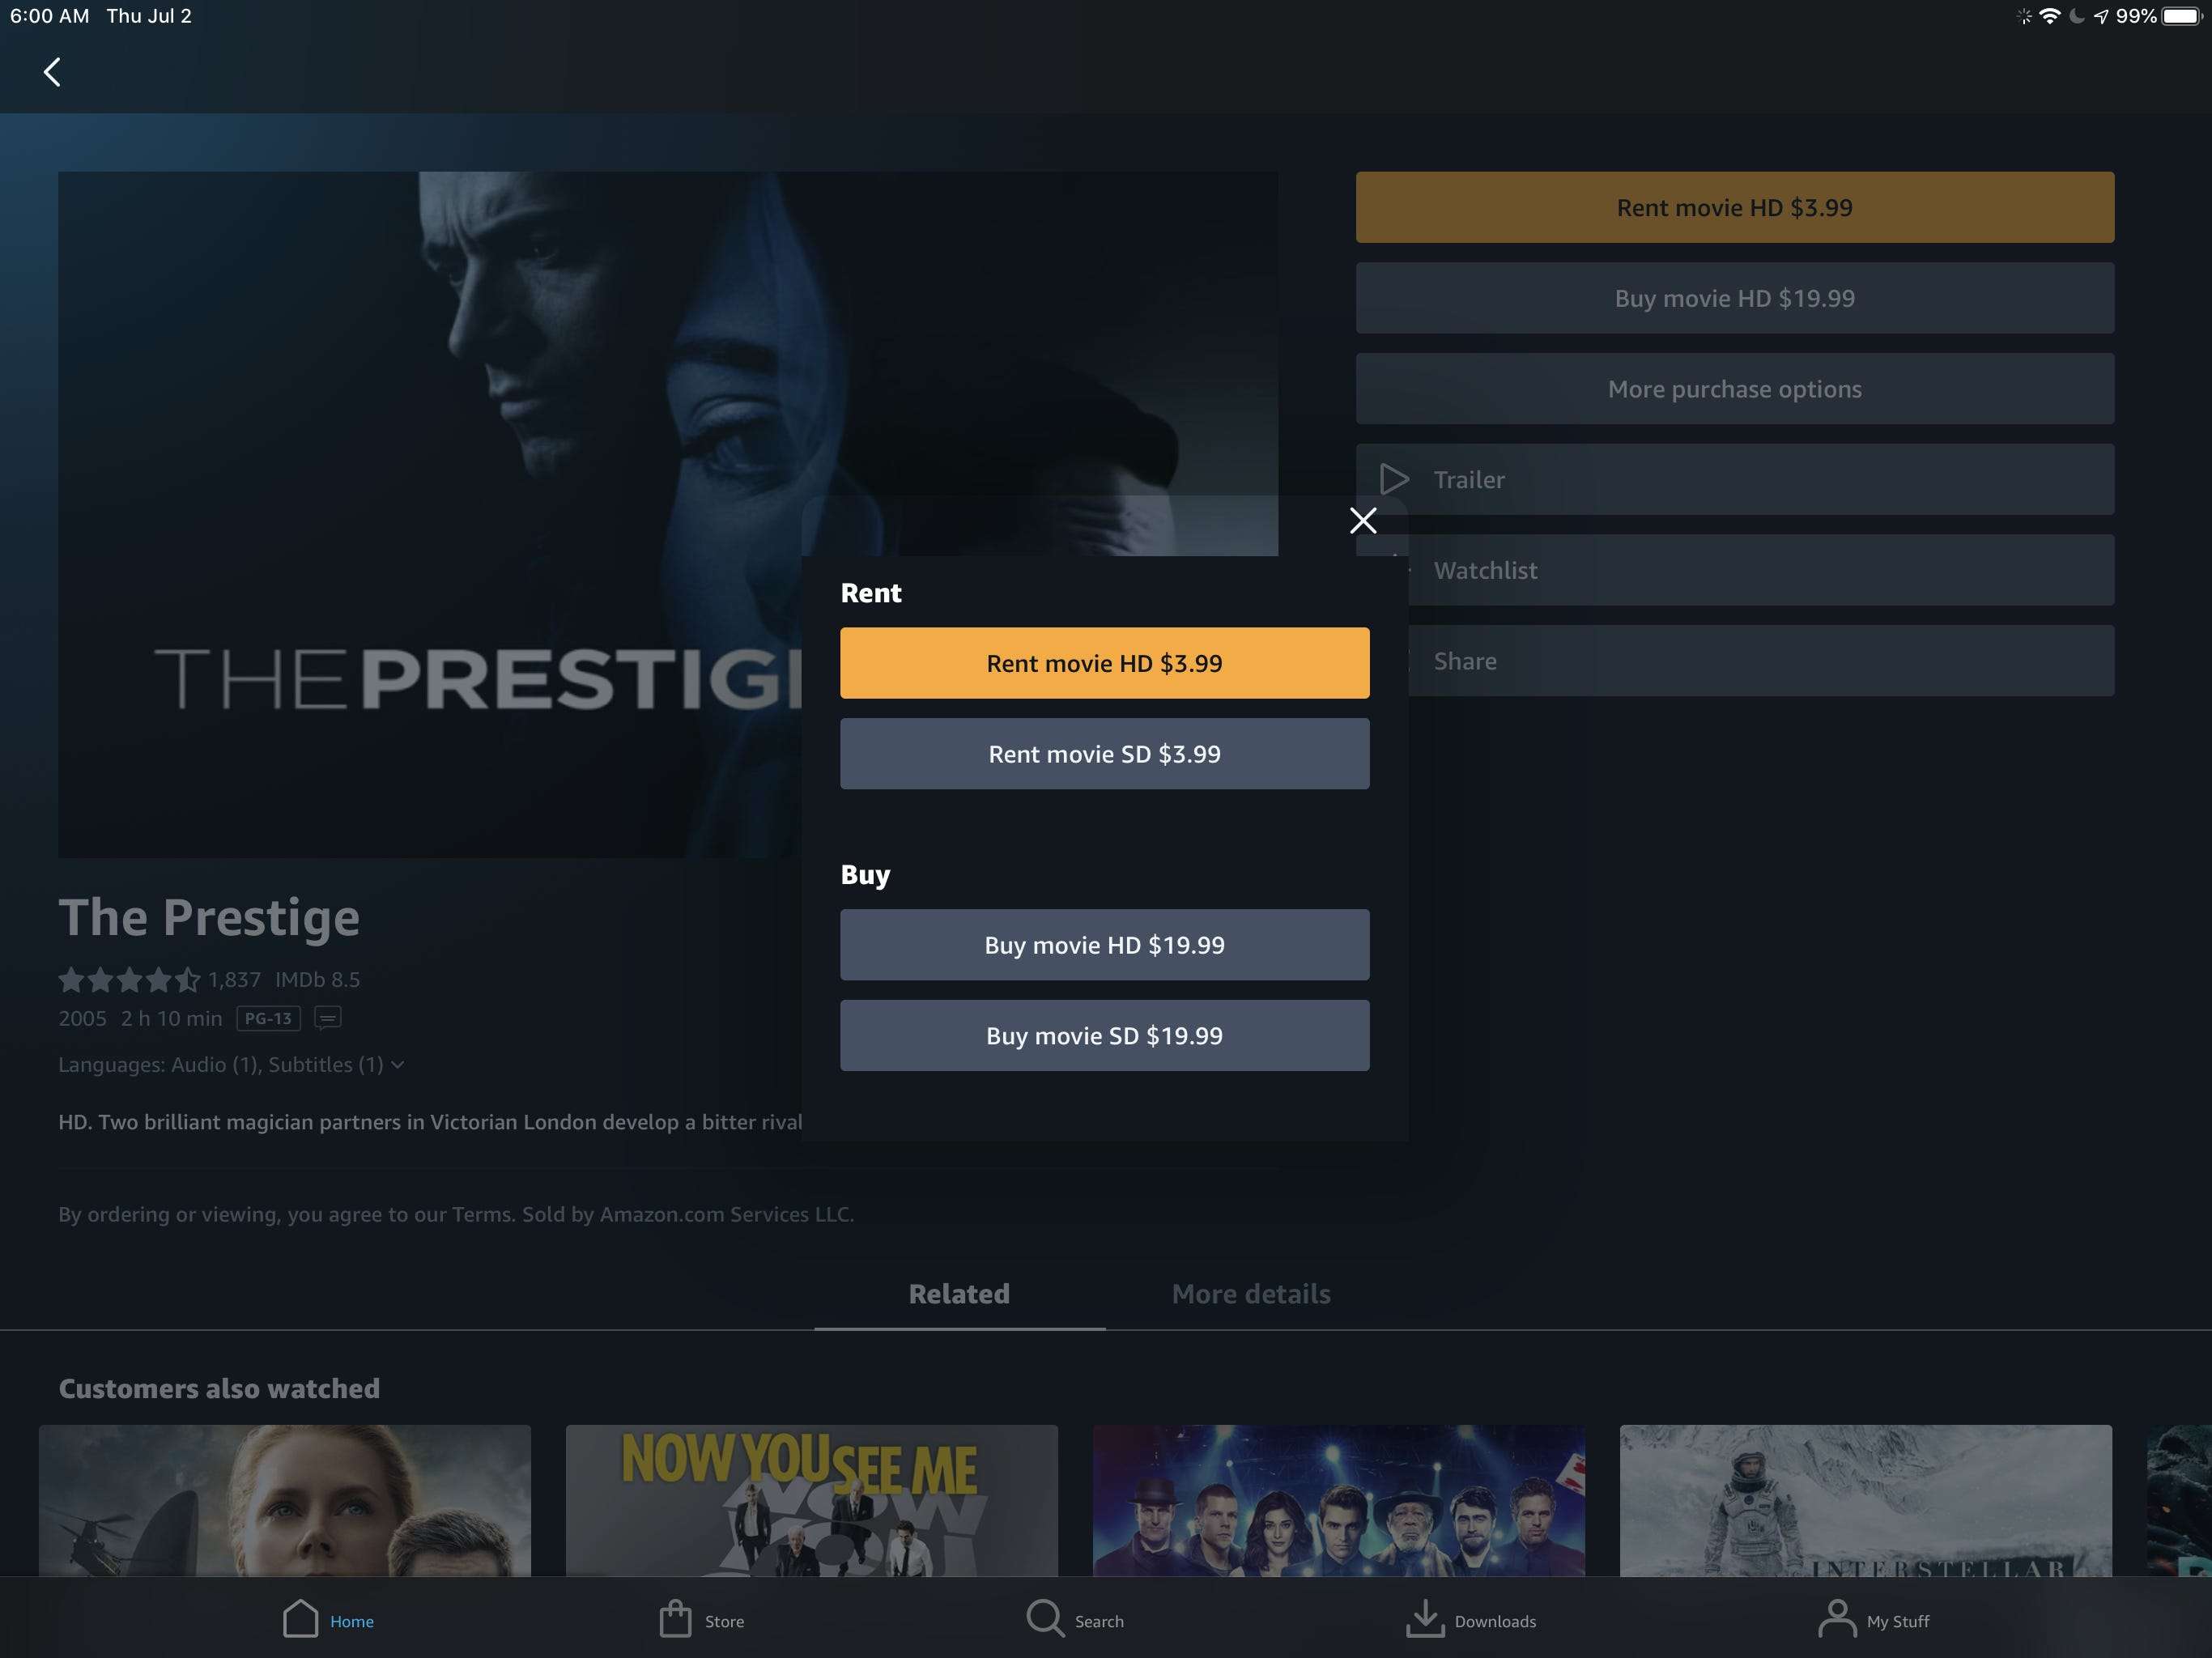 How to rent videos on Amazon Prime Video even if you arent a Prime subscriber, or cancel mistaken rentals Business Insider India